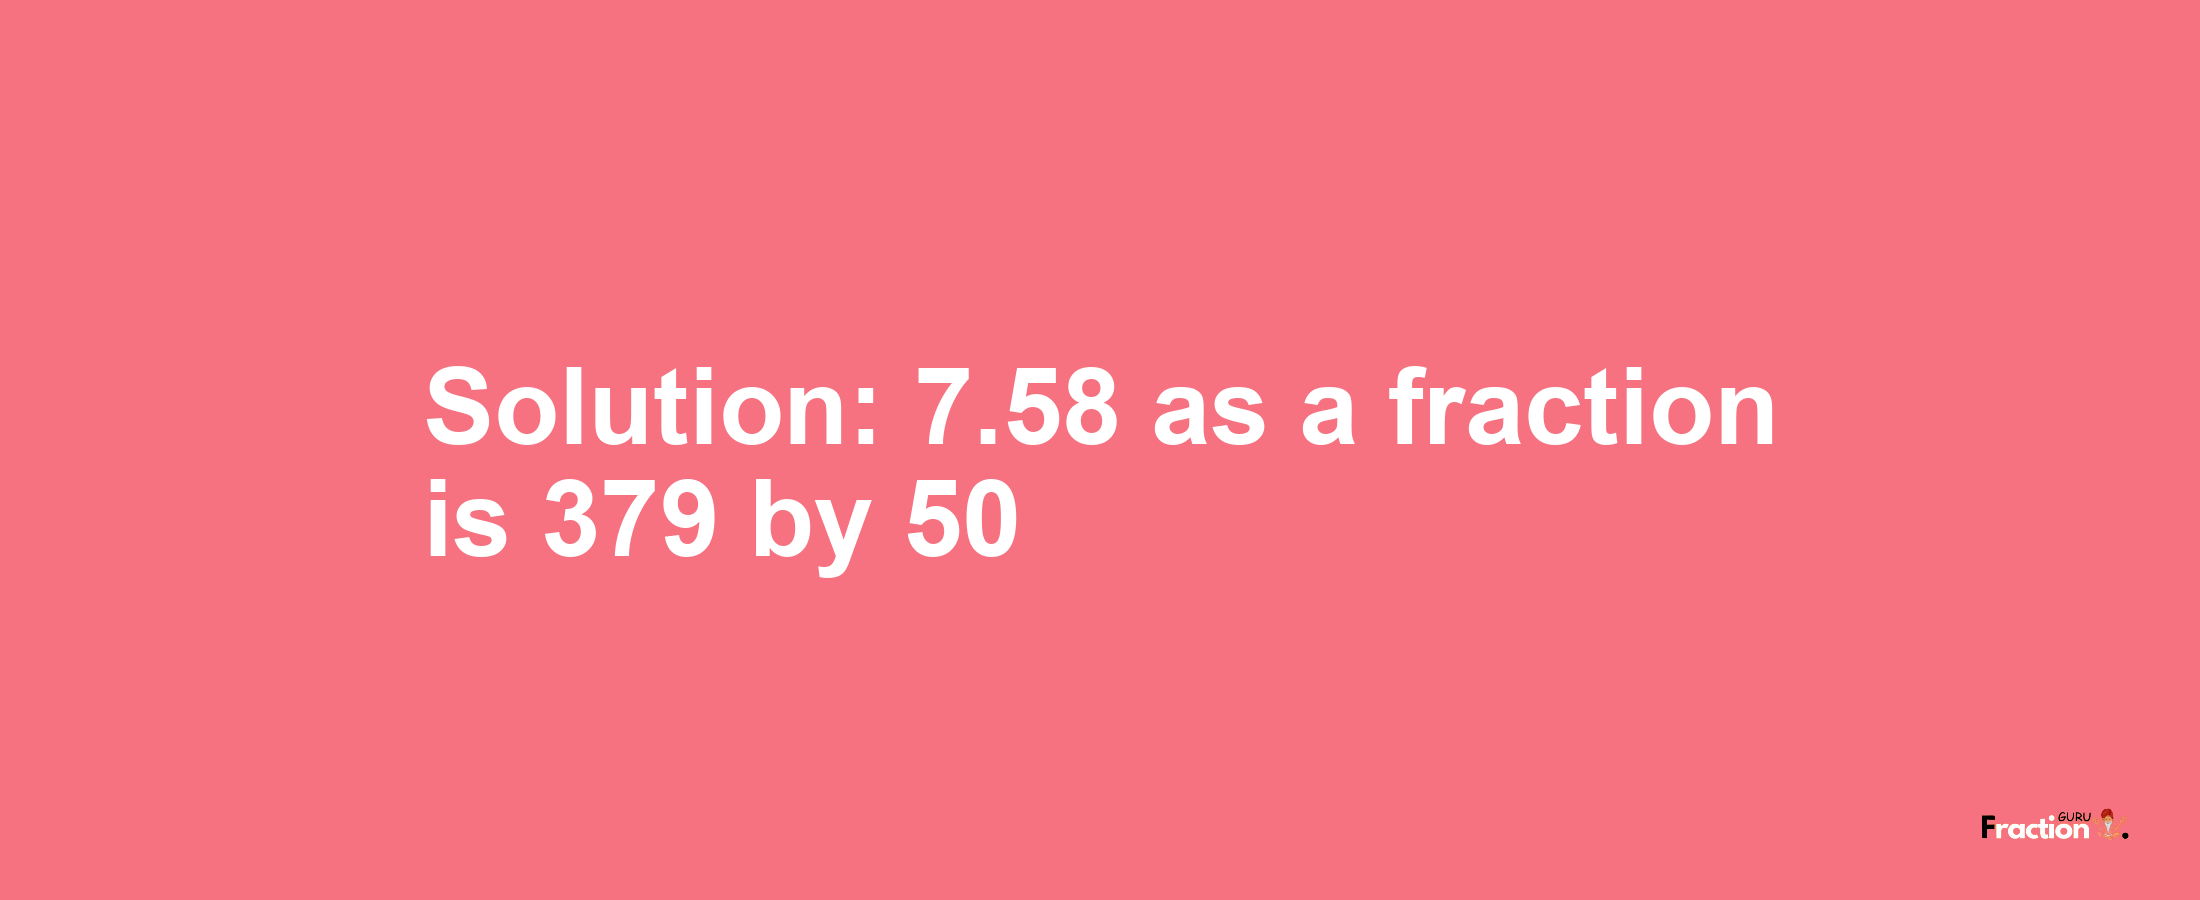 Solution:7.58 as a fraction is 379/50